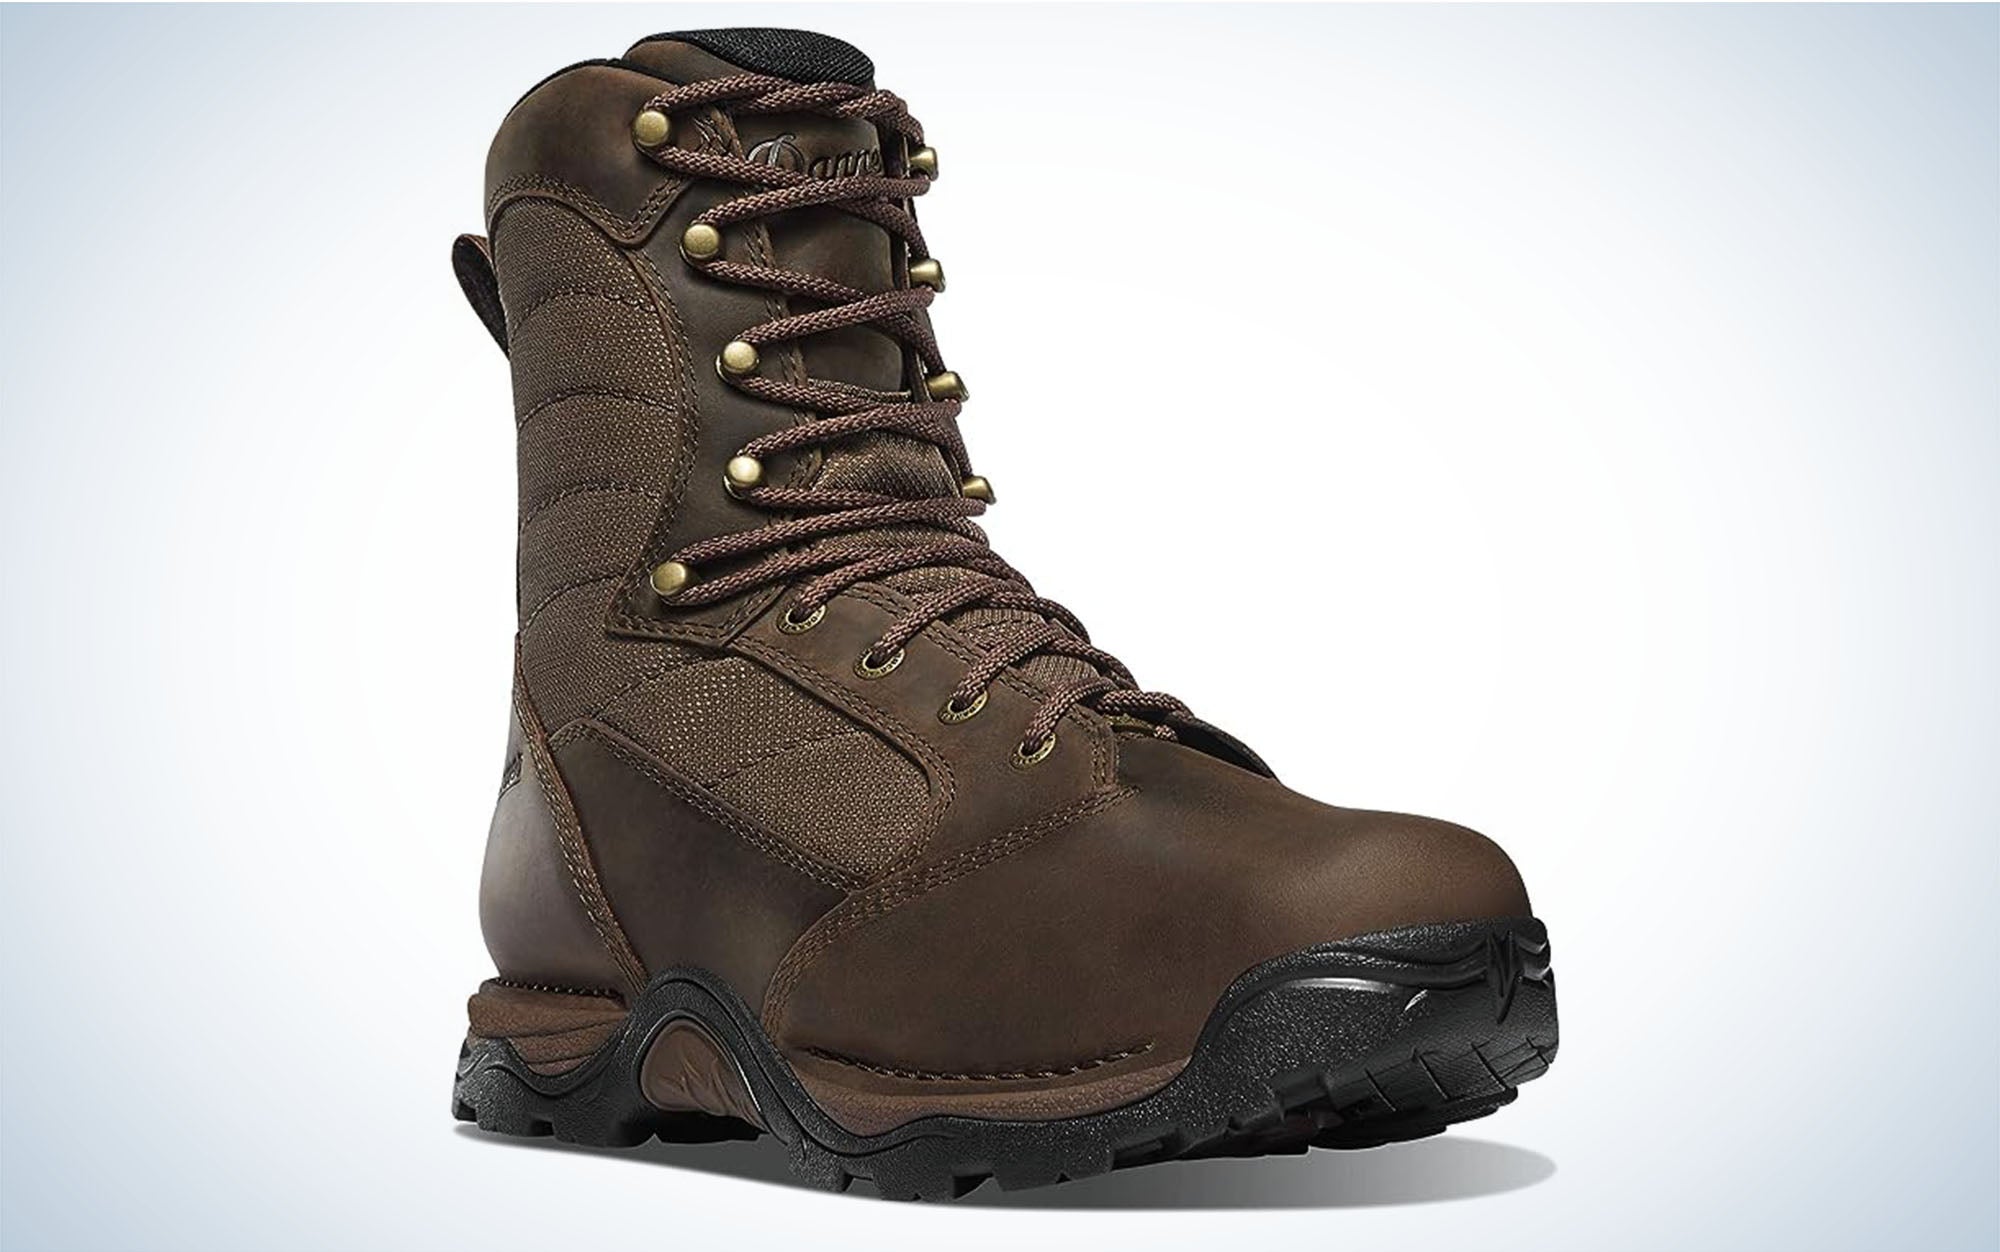 We tested the Danner Pronghorn.